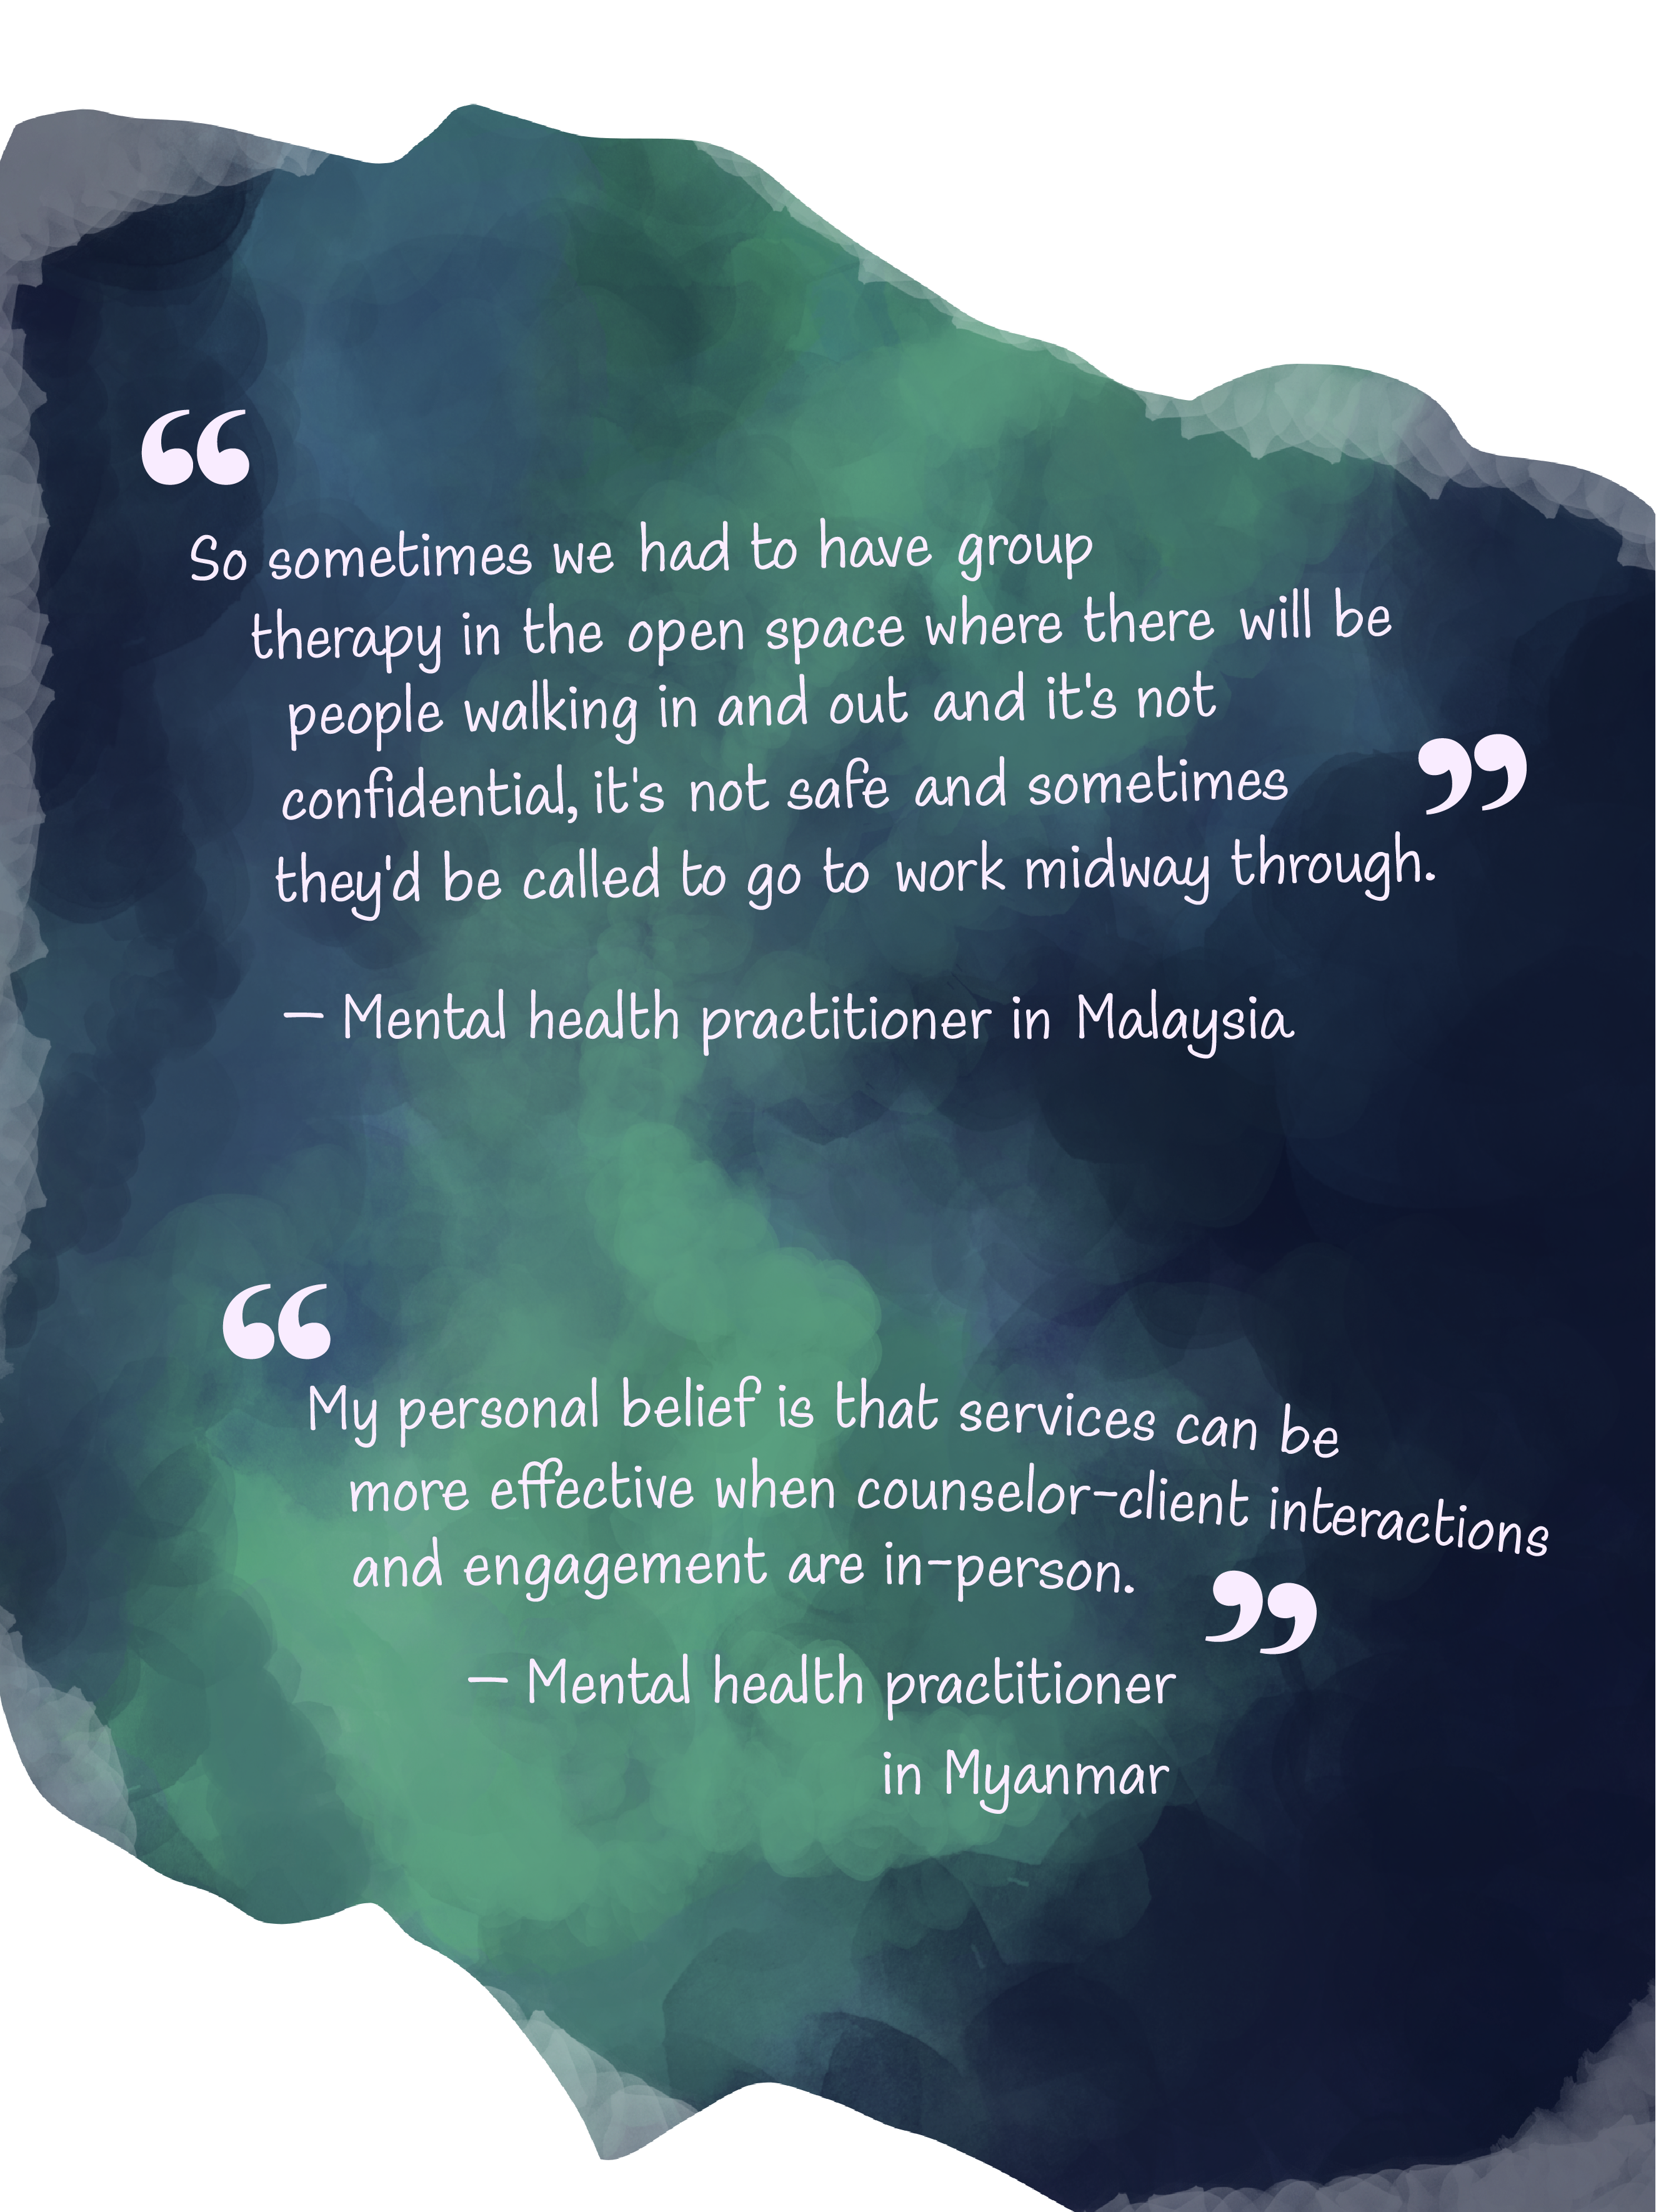 A watercolor wash that looks like a greenish–blue galaxy with 2 quotes from 2 mental health practitioners. The first quote by a mental health practitioner in Malaysia is “So sometimes we had to have group therapy in the open space where there will be people walking in and out and it's not confidential, it's not safe and sometimes they'd be called to go to work midway through”. The last quote is from a practitioner in Myanmar that goes, “My personal belief is that services can be more effective when counselor-client interactions and engagement are in-person”.